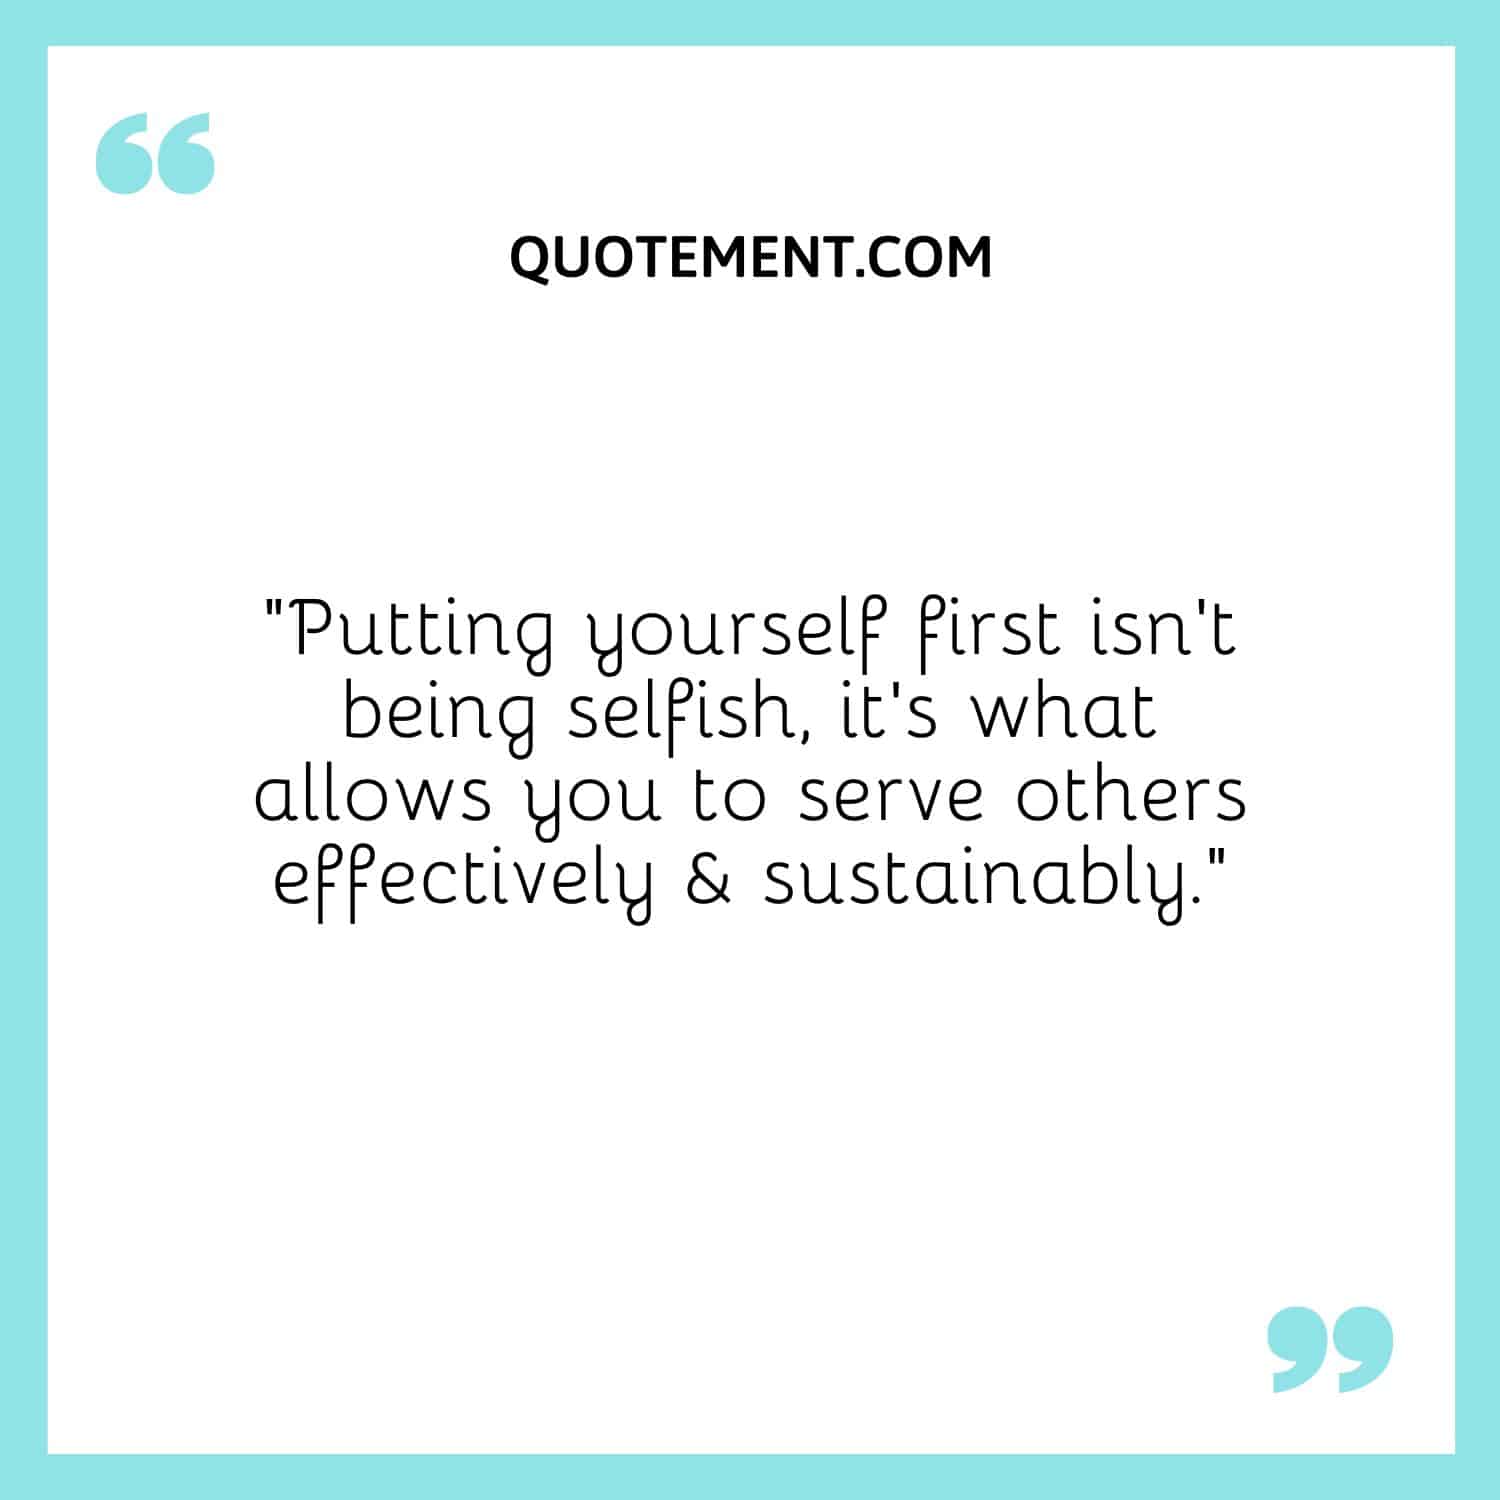 Putting yourself first isn't being selfish